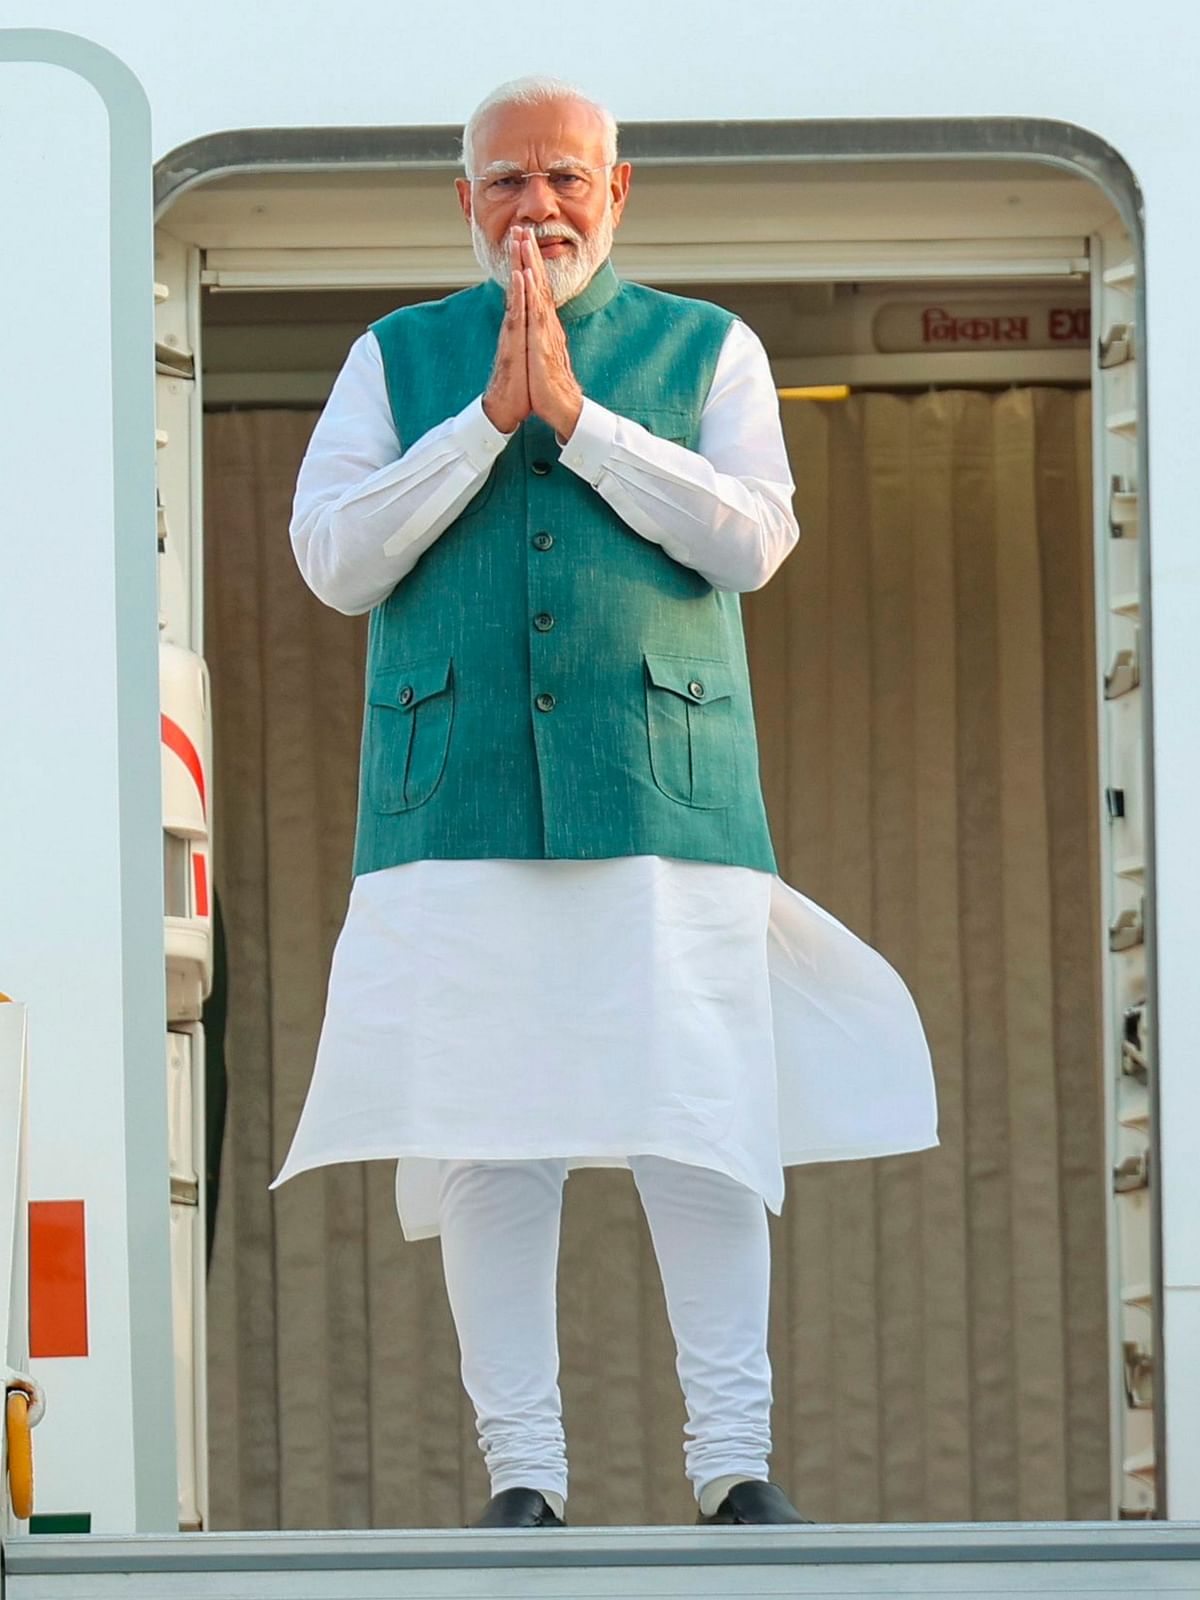 Prime Minister Narendra Modi will attend the Outreach session of the G7 Summit in Italy. In his day-long visit, Modi will attend a summit session entitled Artificial Intelligence, Energy, Africa-Mediterranean to be hosted by Italian Prime Minister Georgia Meloni and joined by Pope Francis.